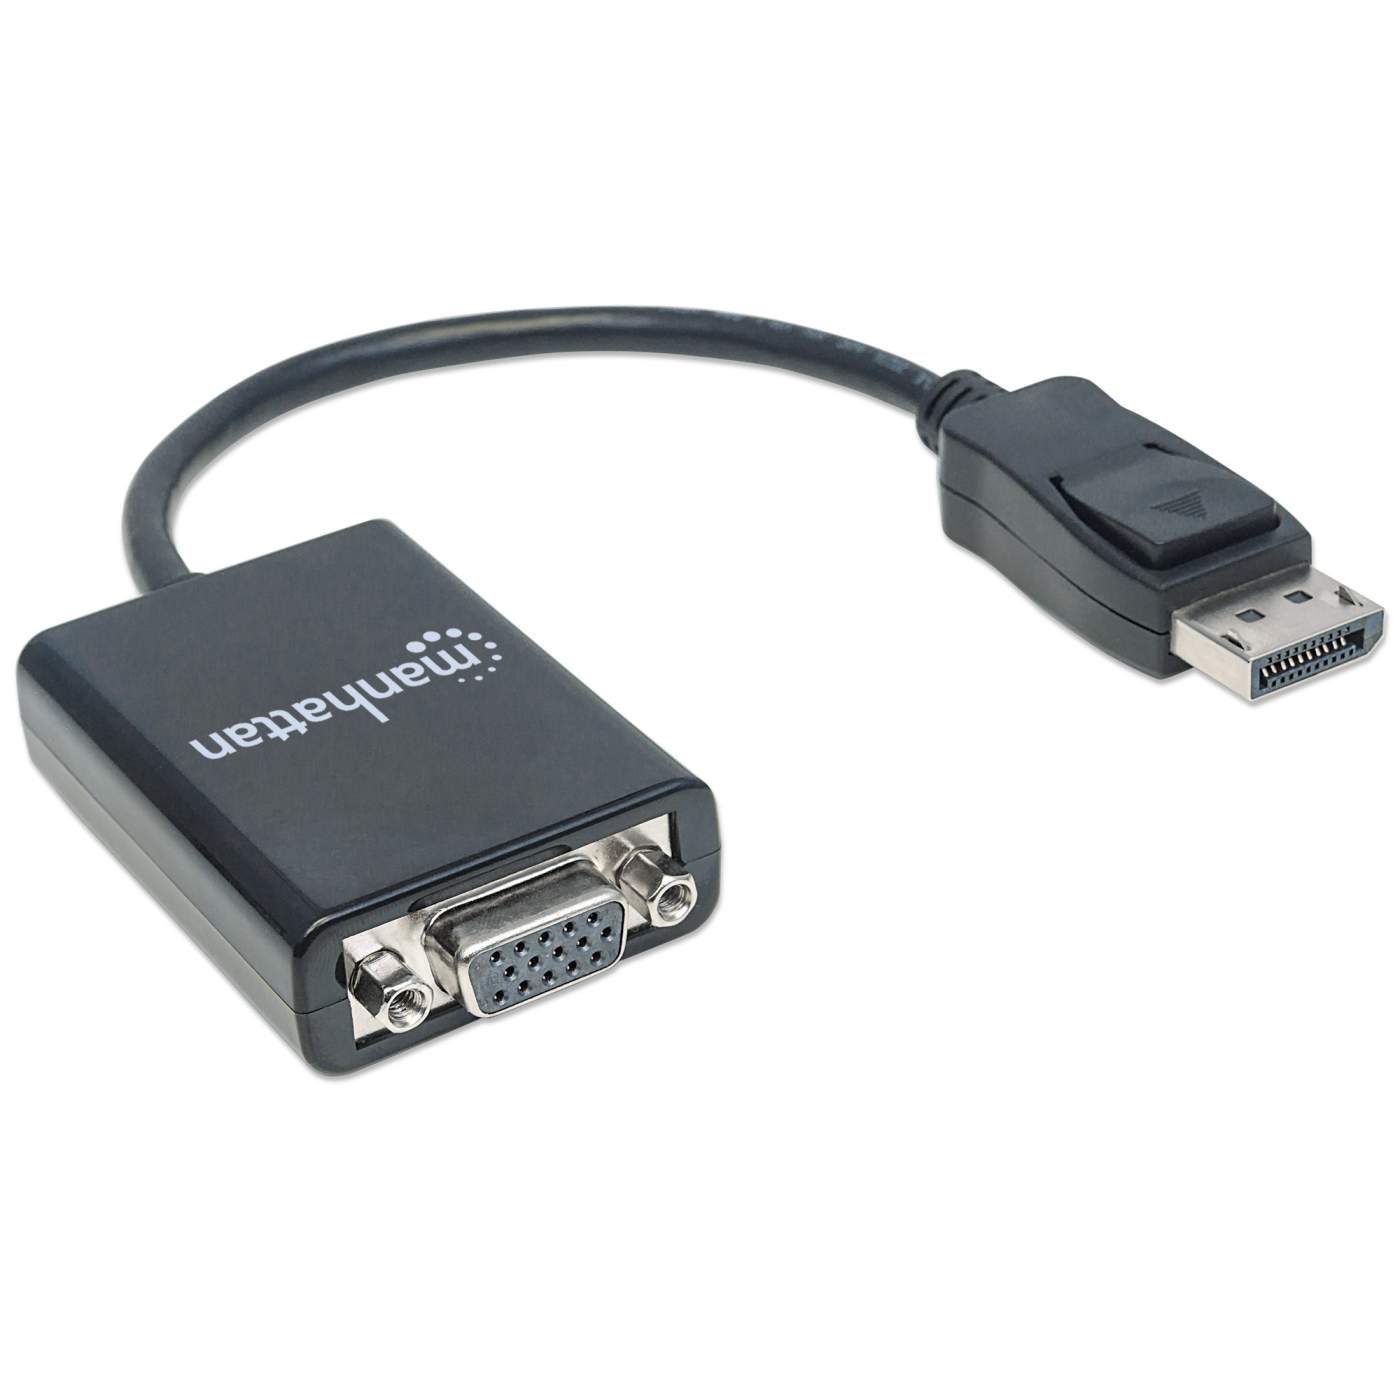 DisplayPort to VGA Cable Adapter 